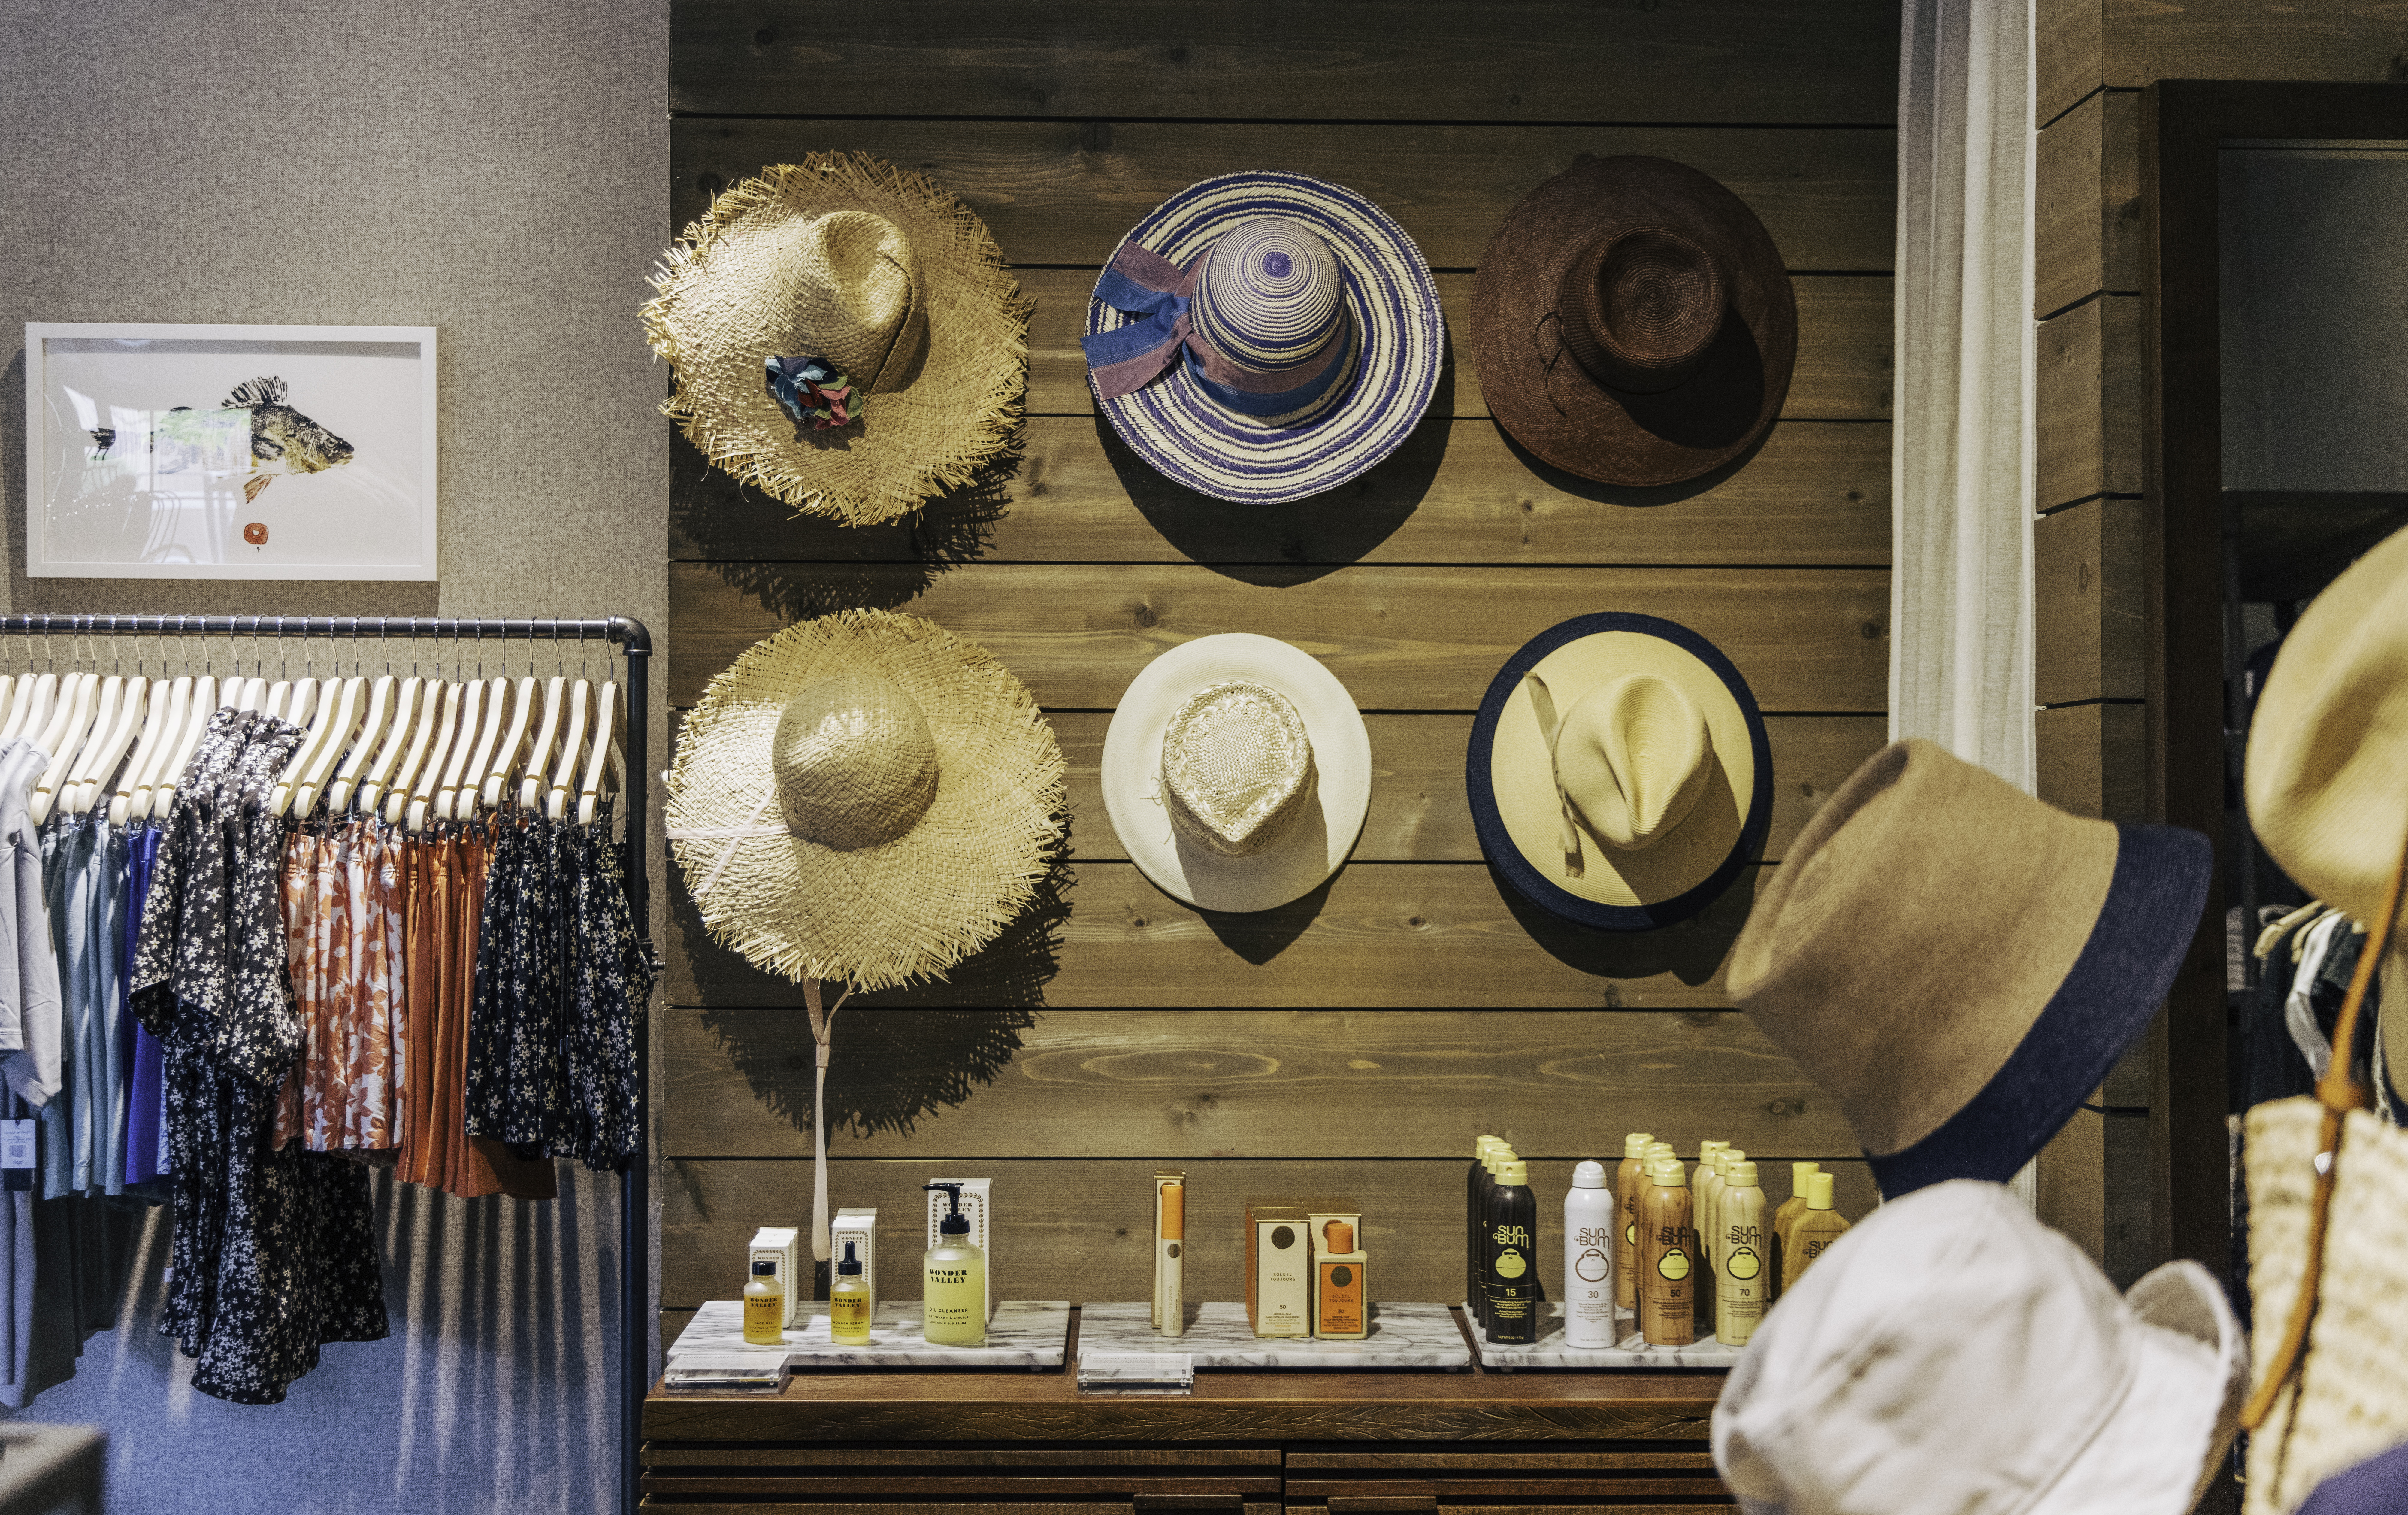 Gurney's shop with a display of hats and clothing.